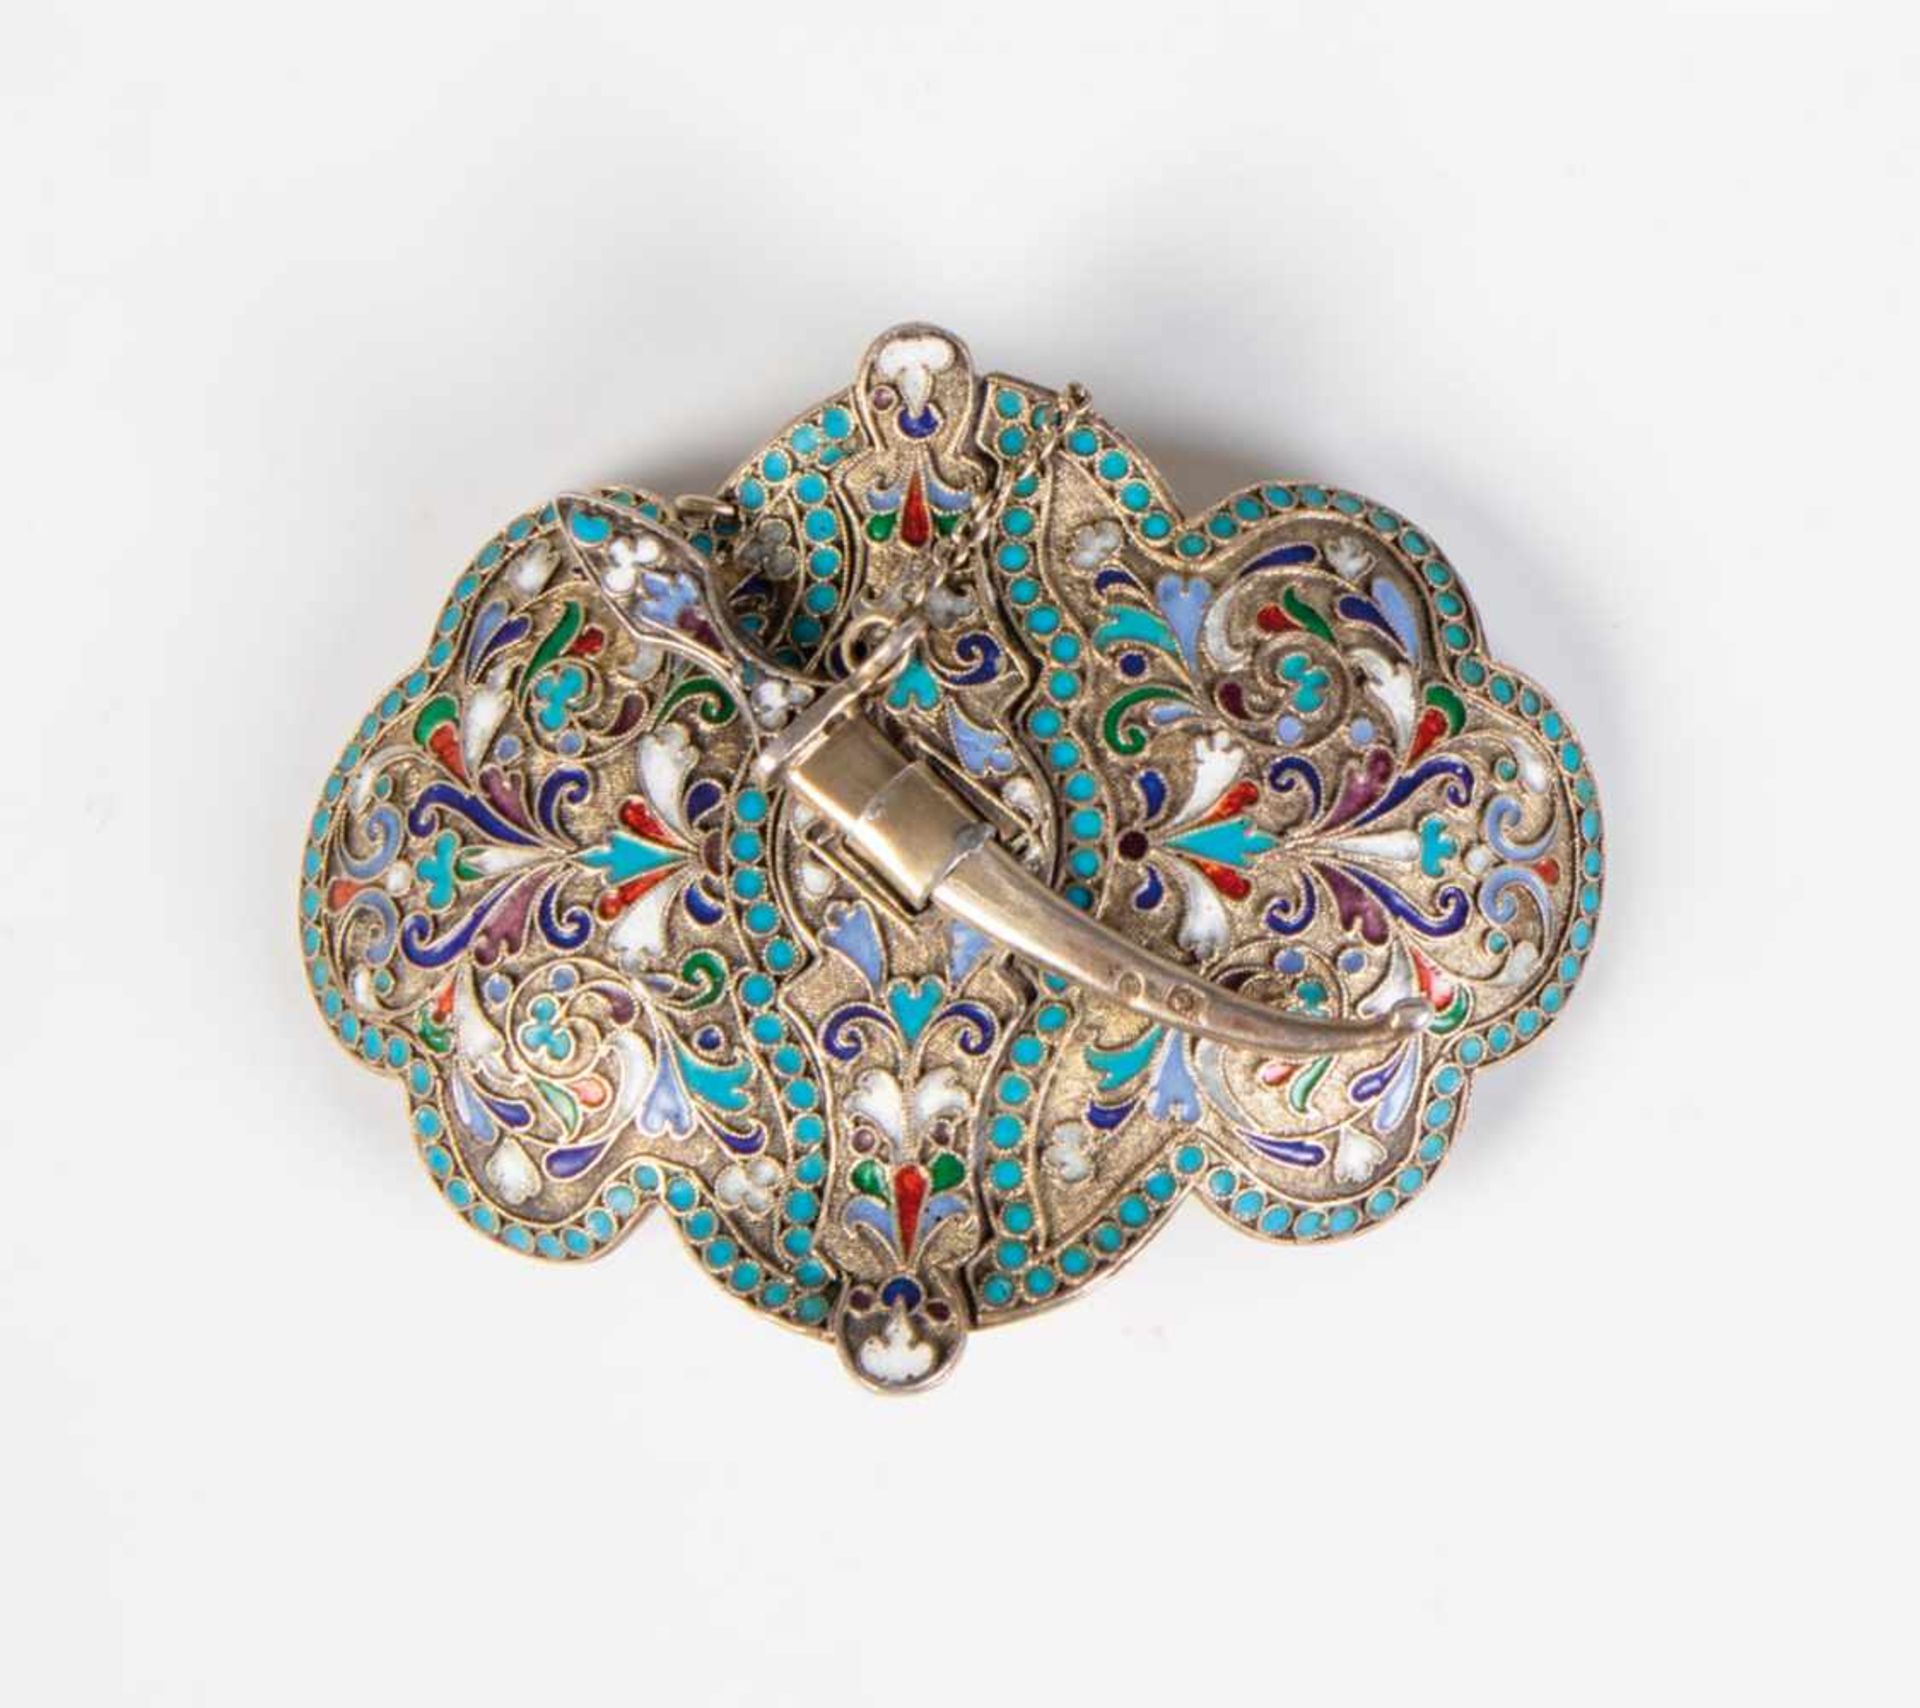 A silver-gilt and cloisonné-enamel belt buckle. Russia, Moscow, 1896-1908. Body withstylized